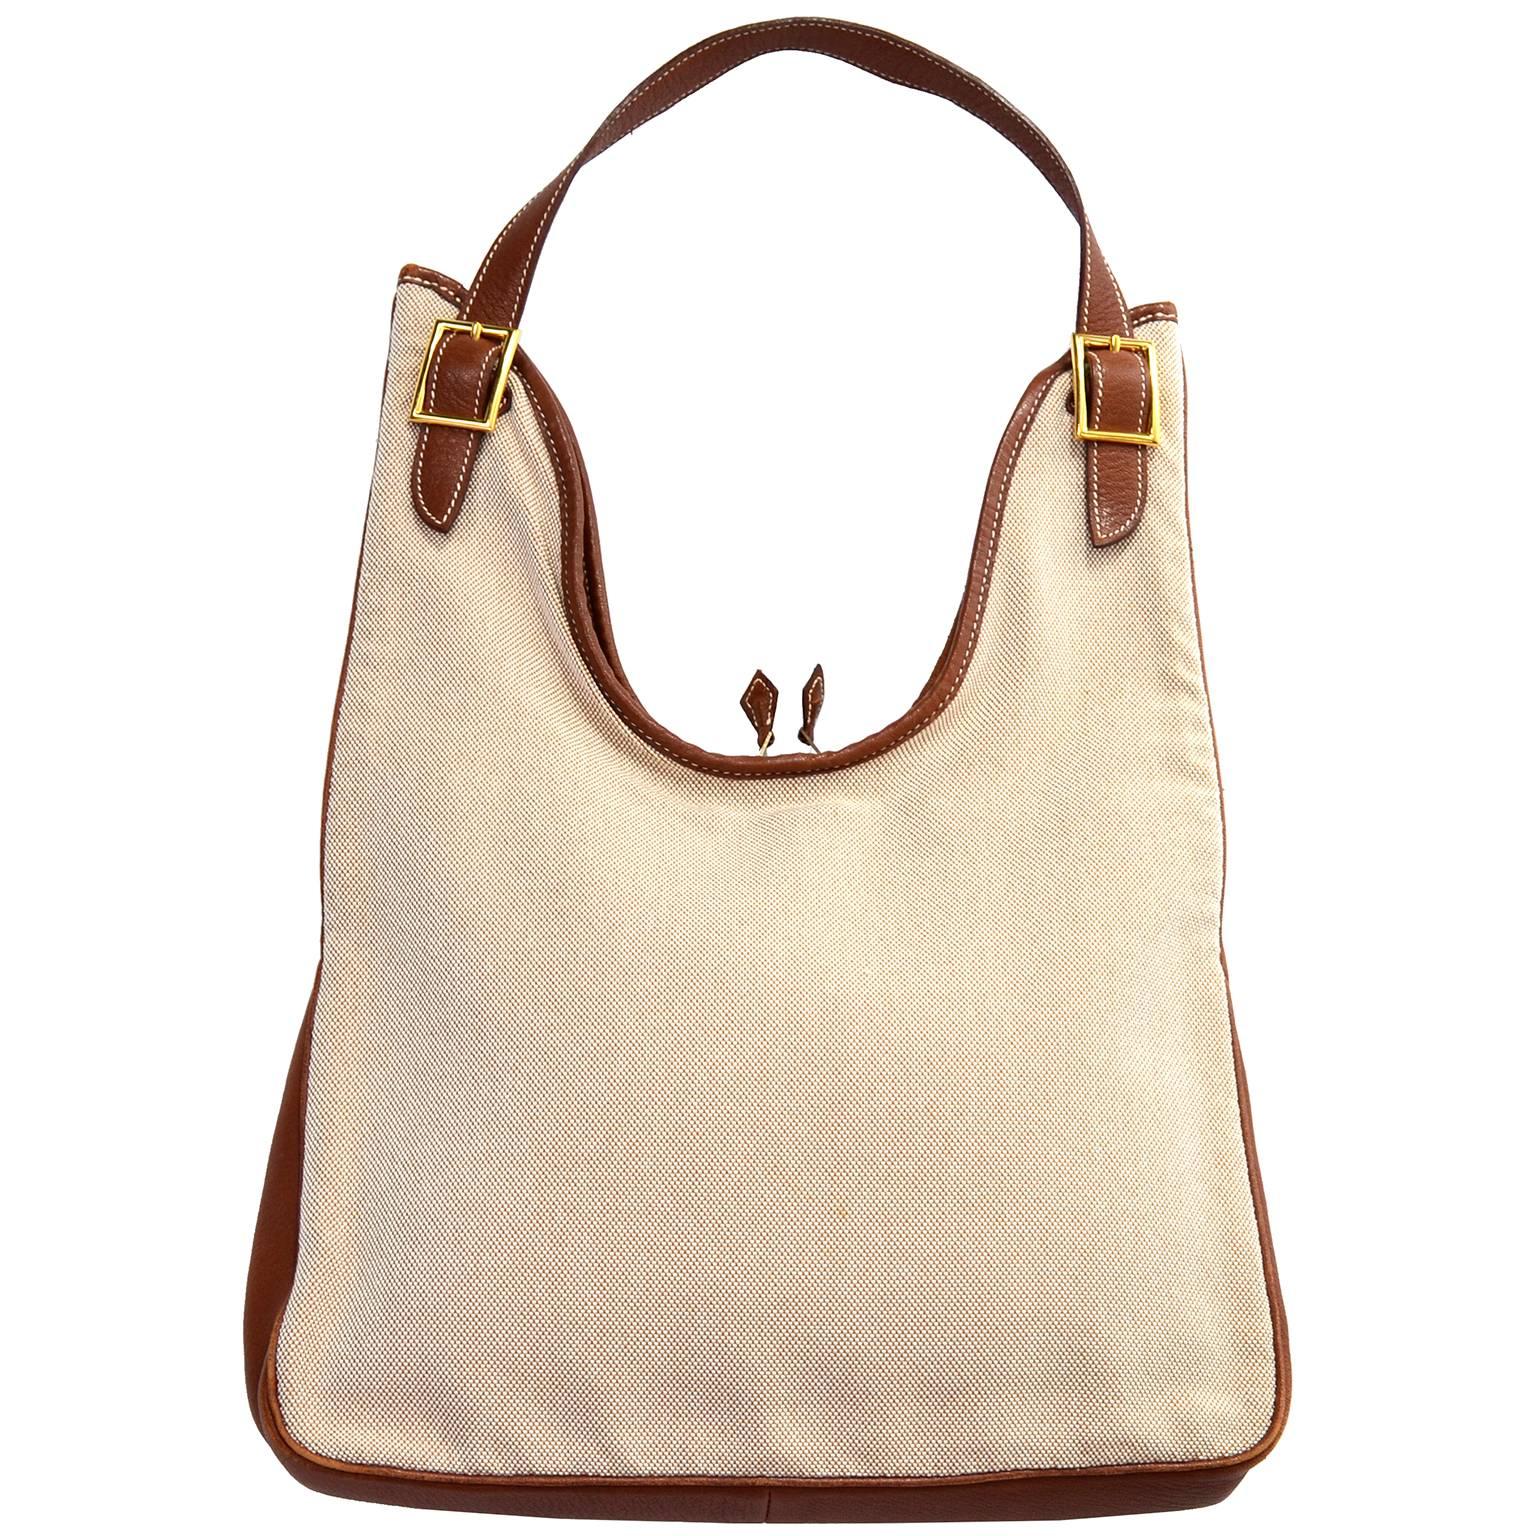 Hermes Massai Cut Handbag in Beige Canvas With Full Leather Lining and Trim